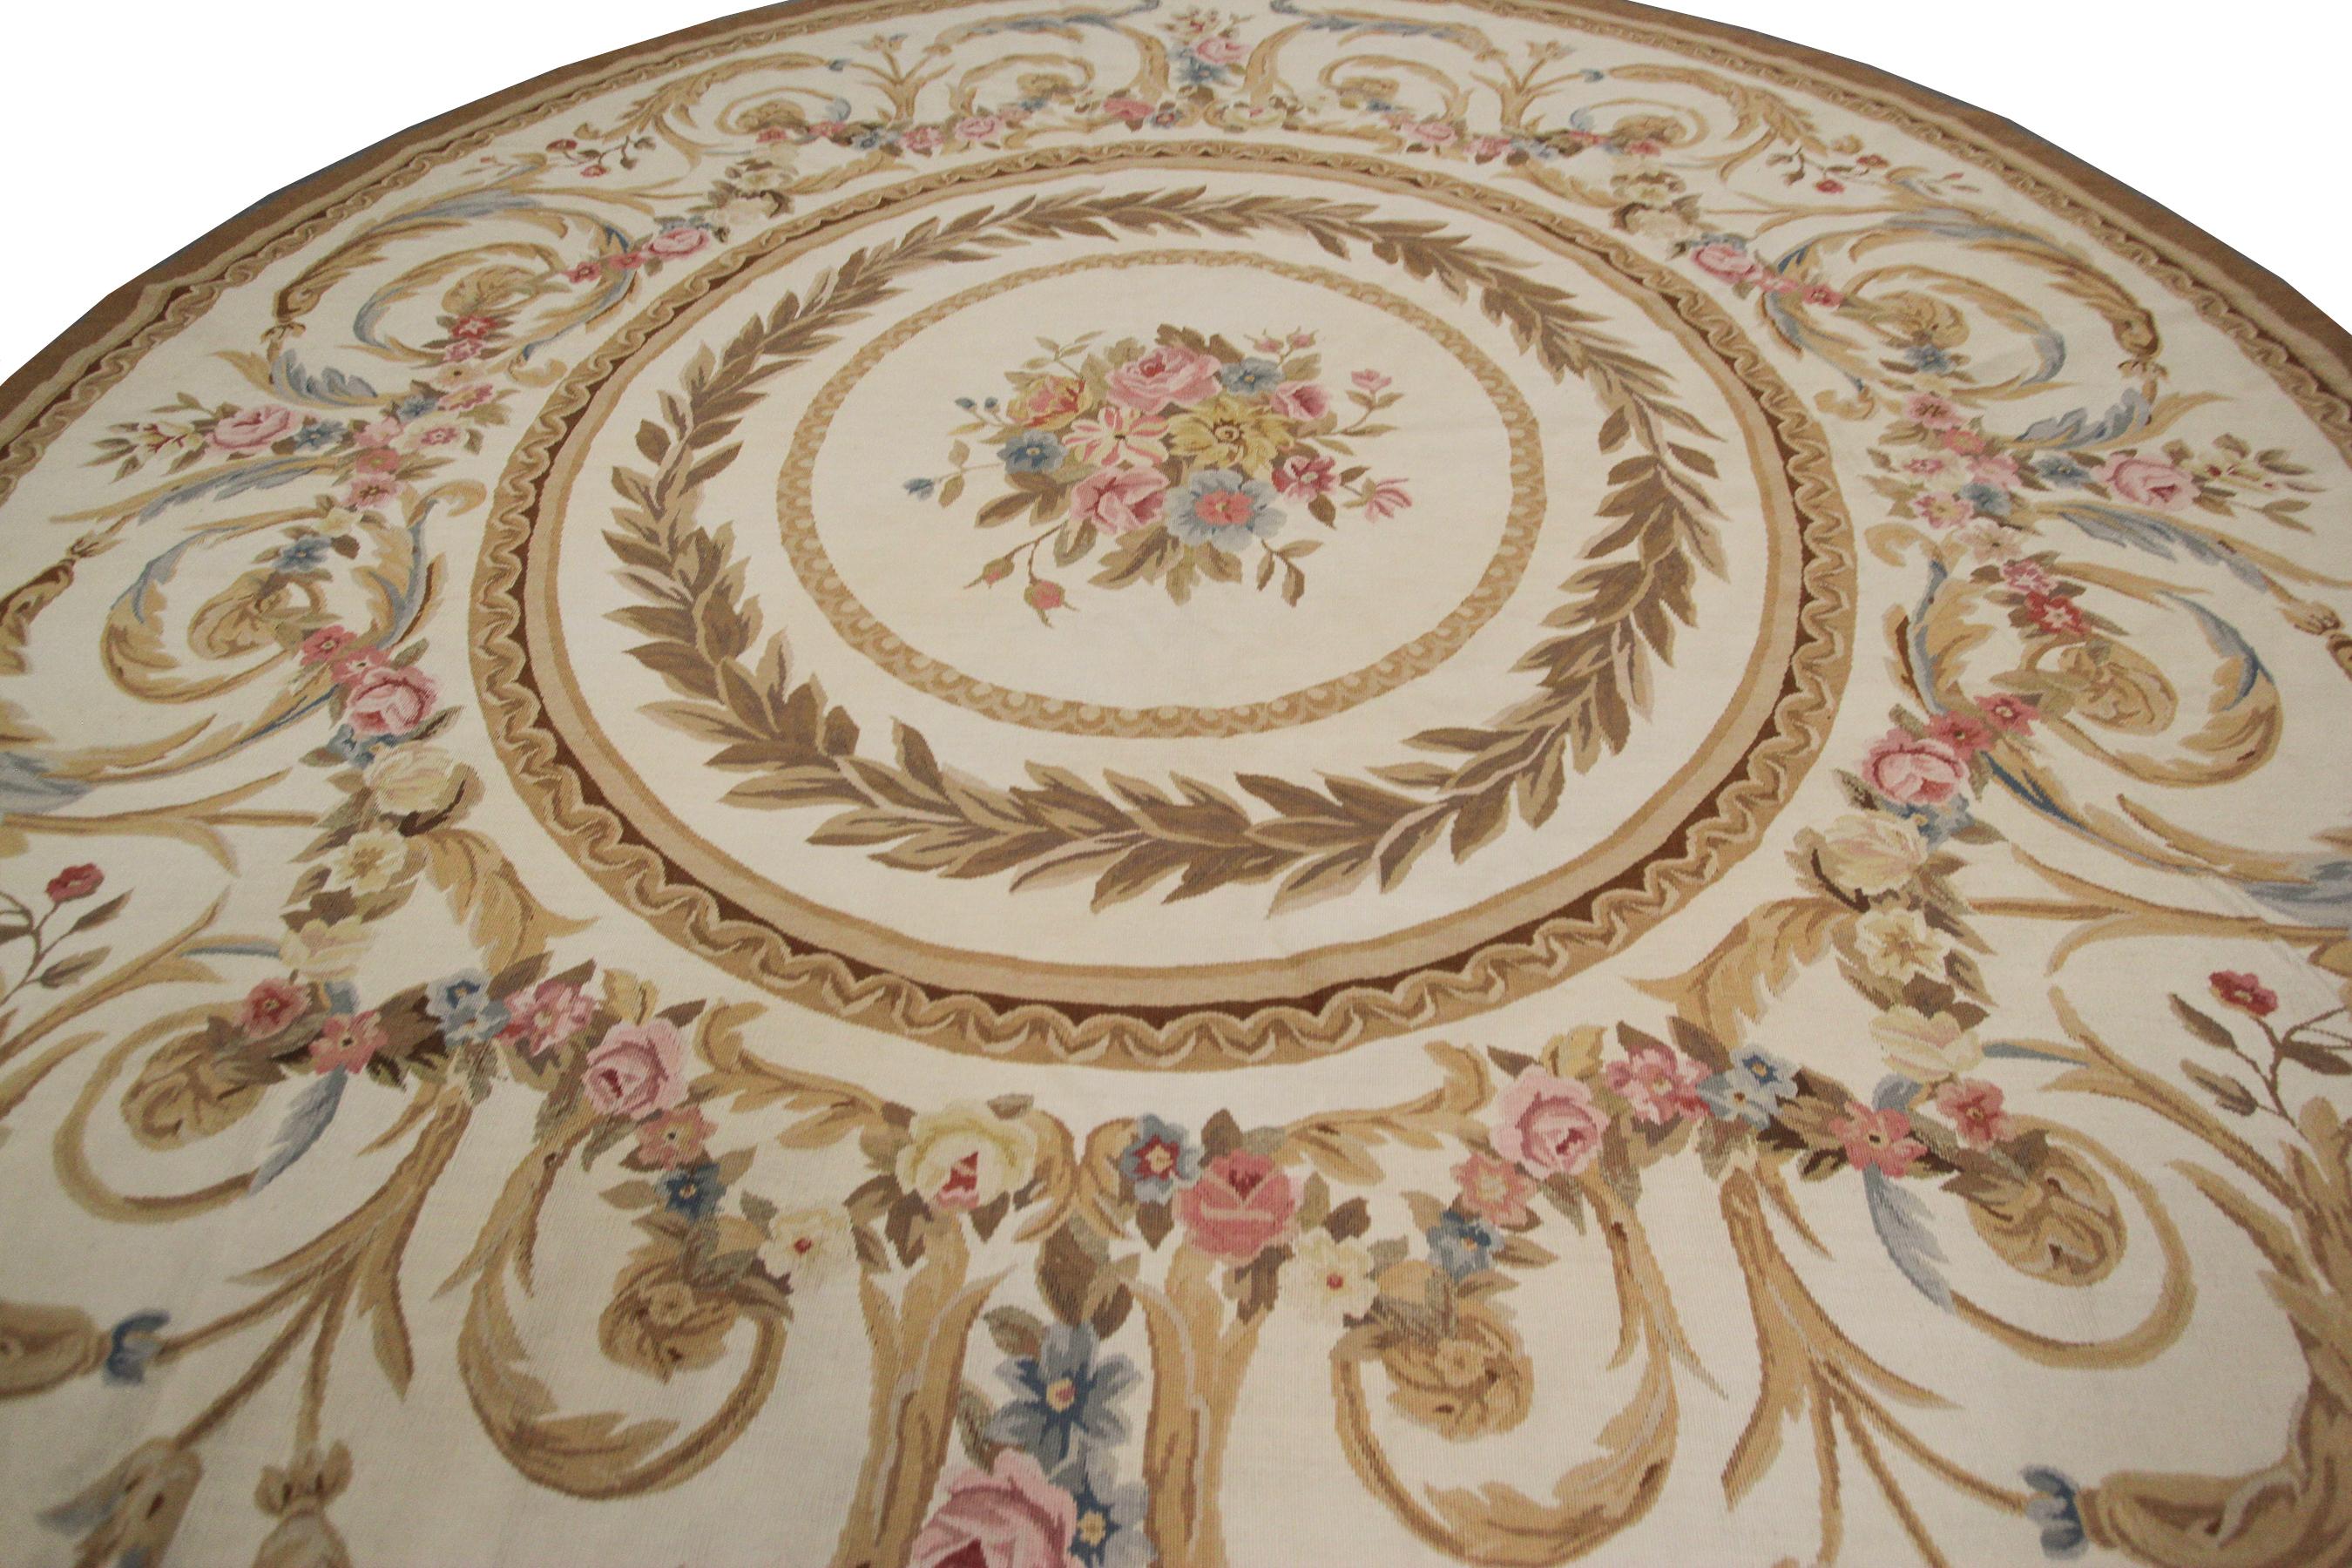 Early 20th Century Antique French Aubusson Rug Hand Woven Aubusson Rug 8x8 Round Rug 244cm x 244cm For Sale